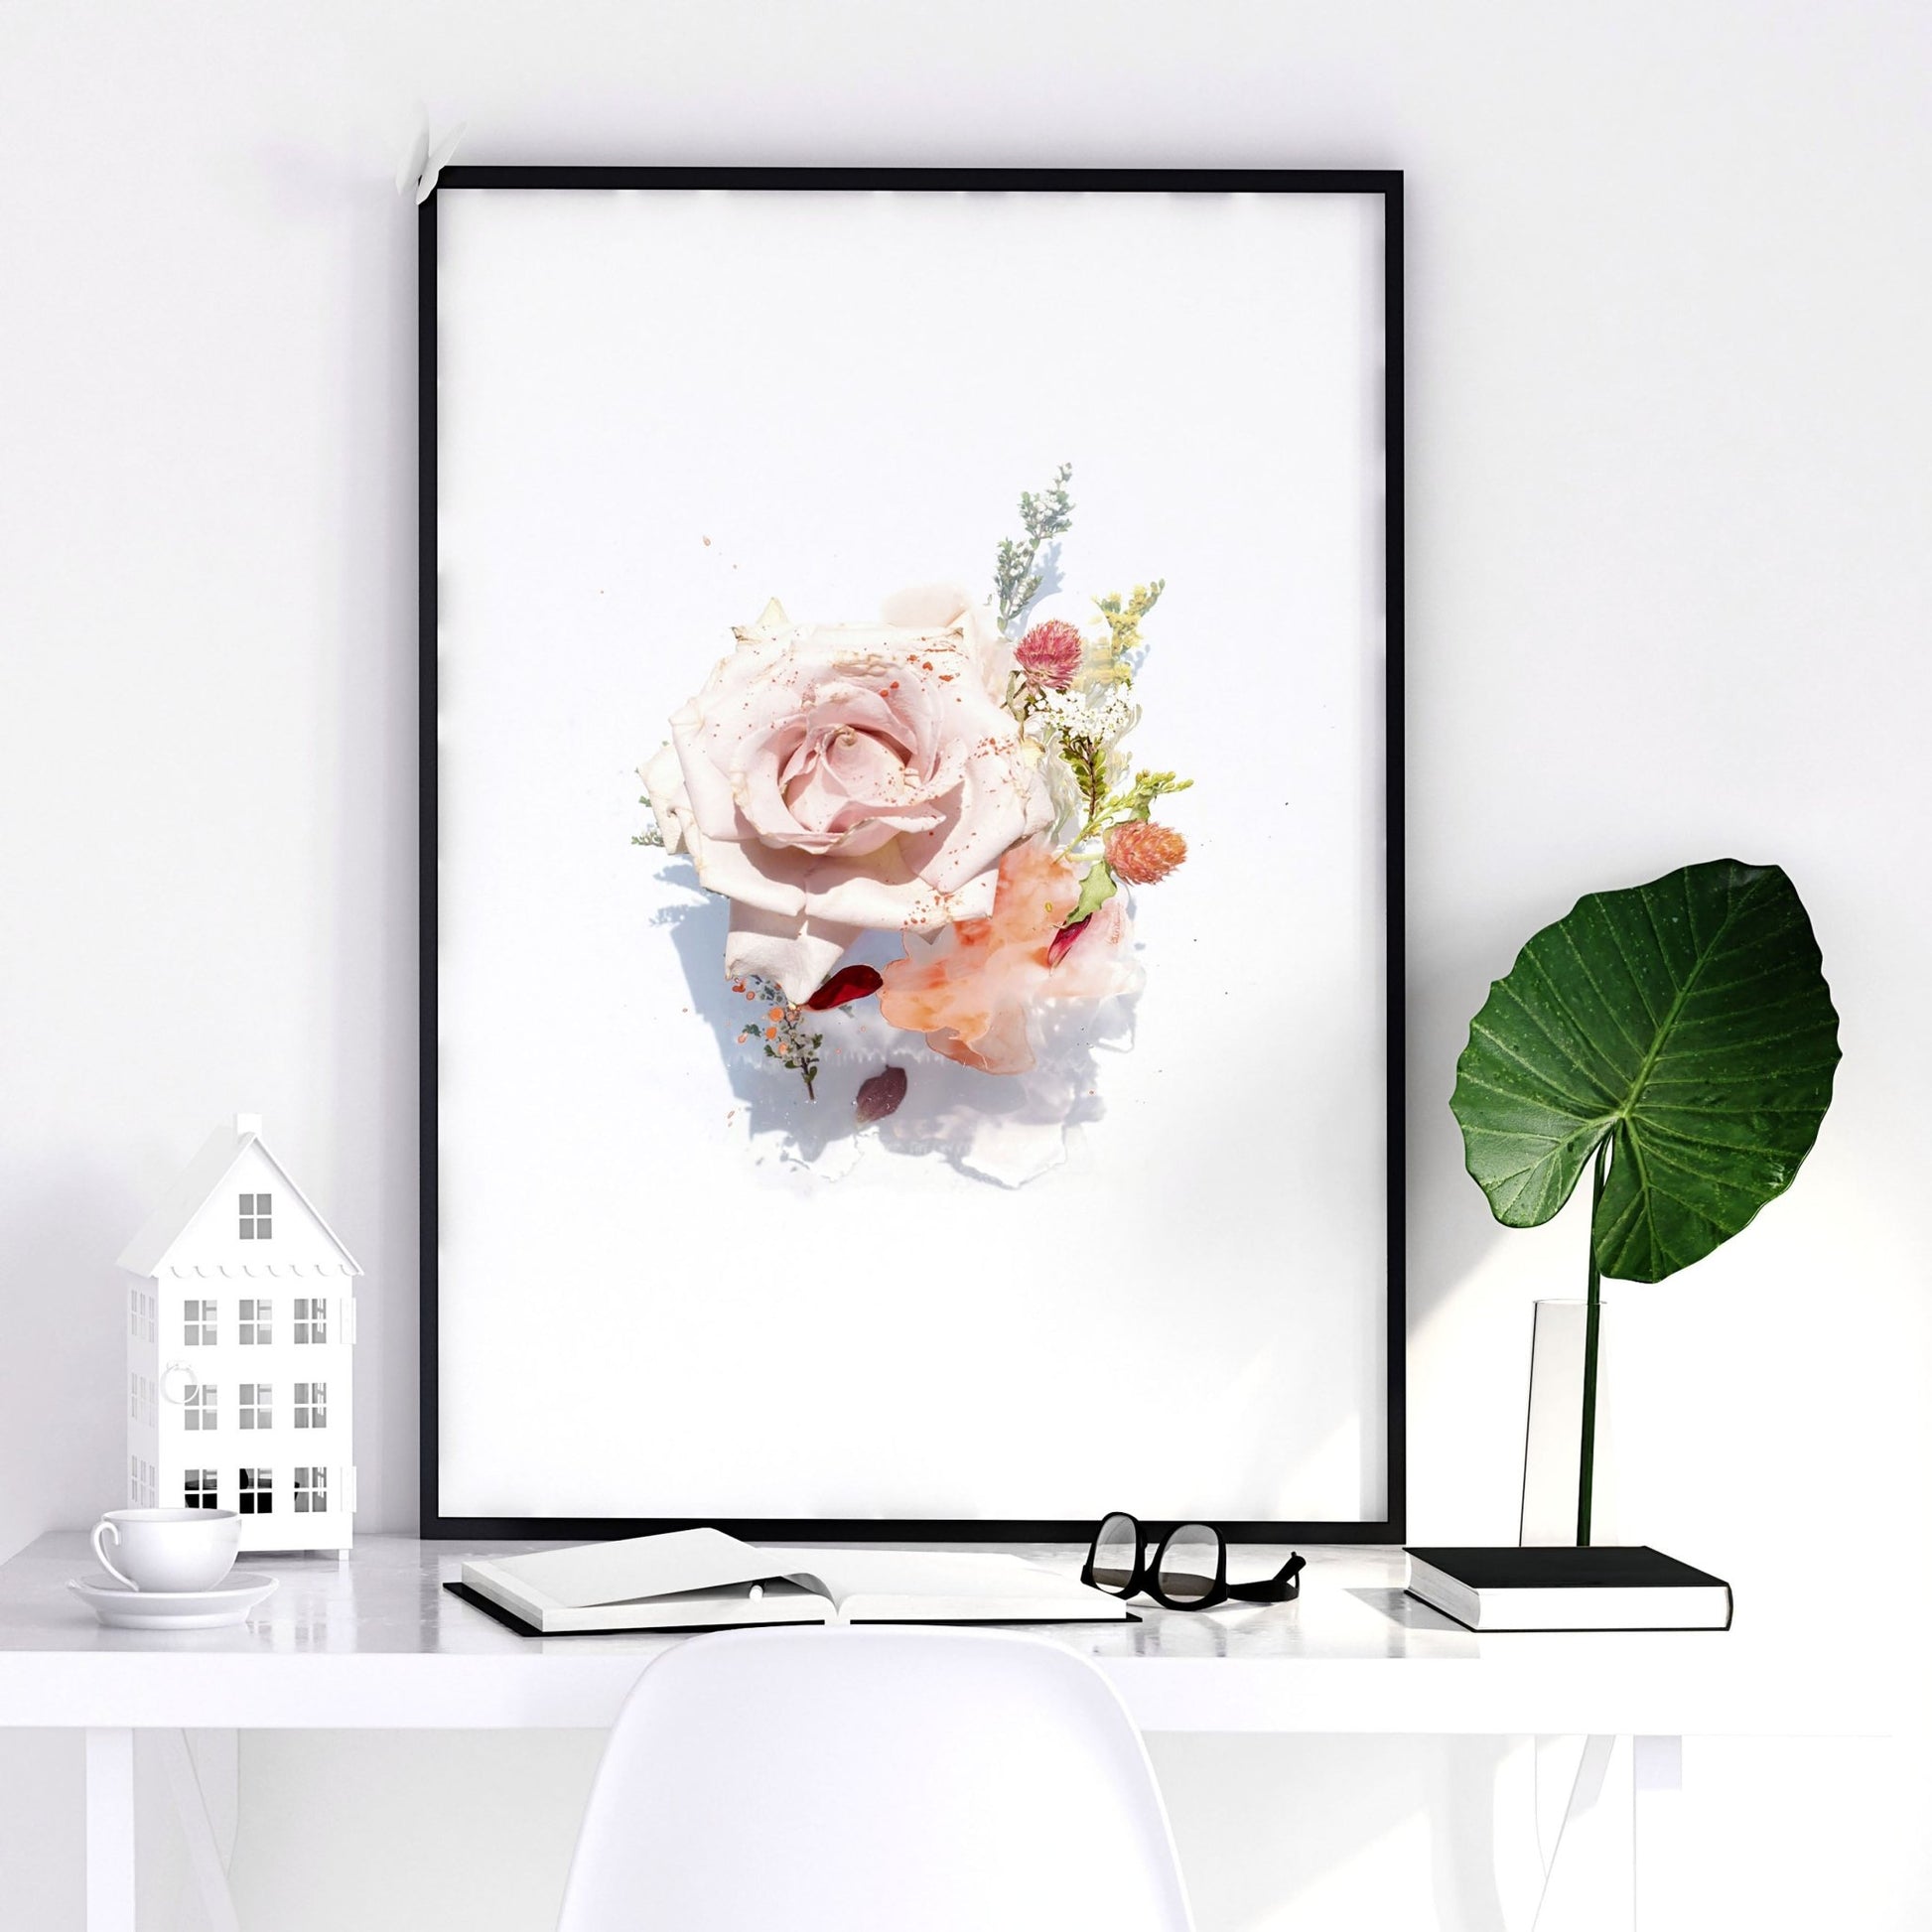 Art for the living room | set of 3 wall art prints - About Wall Art